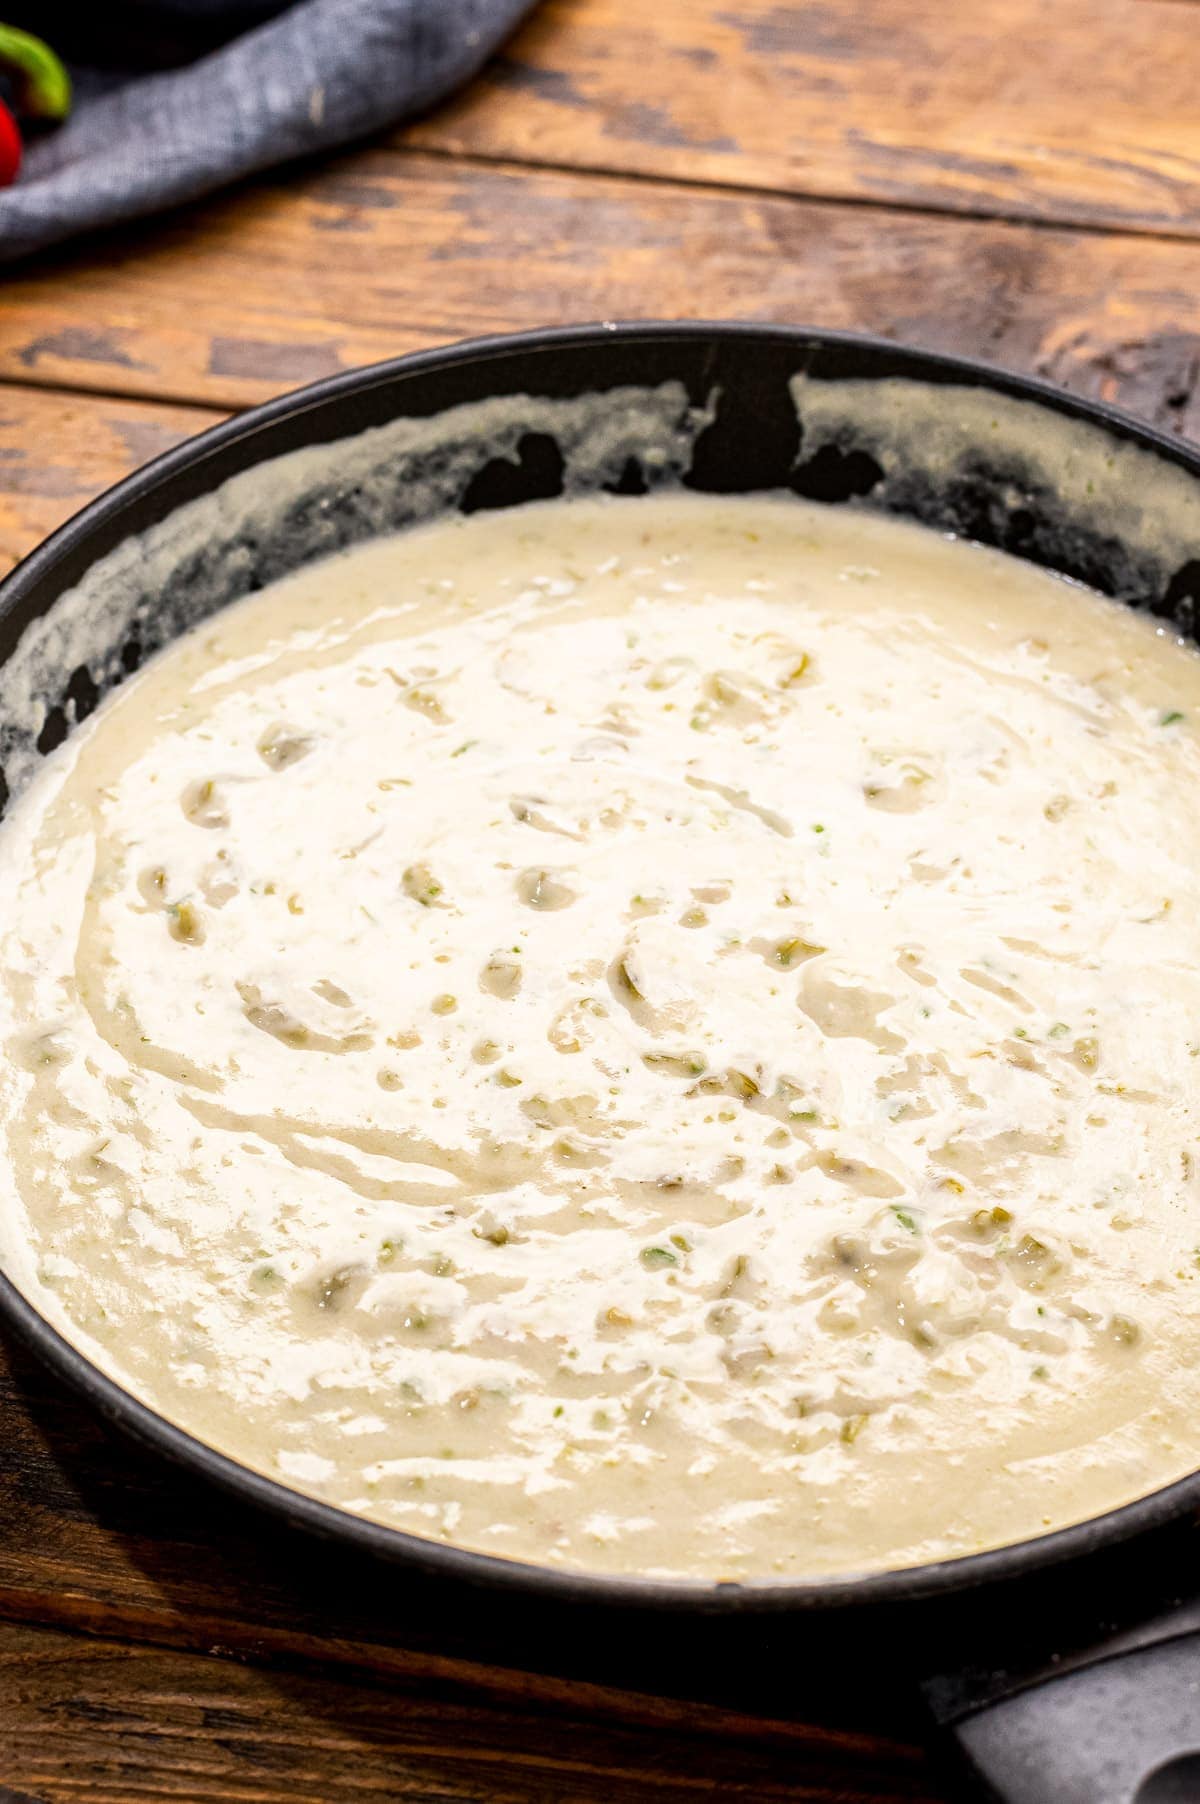 A cream sauce for enchiladas in a skillet after cooking.